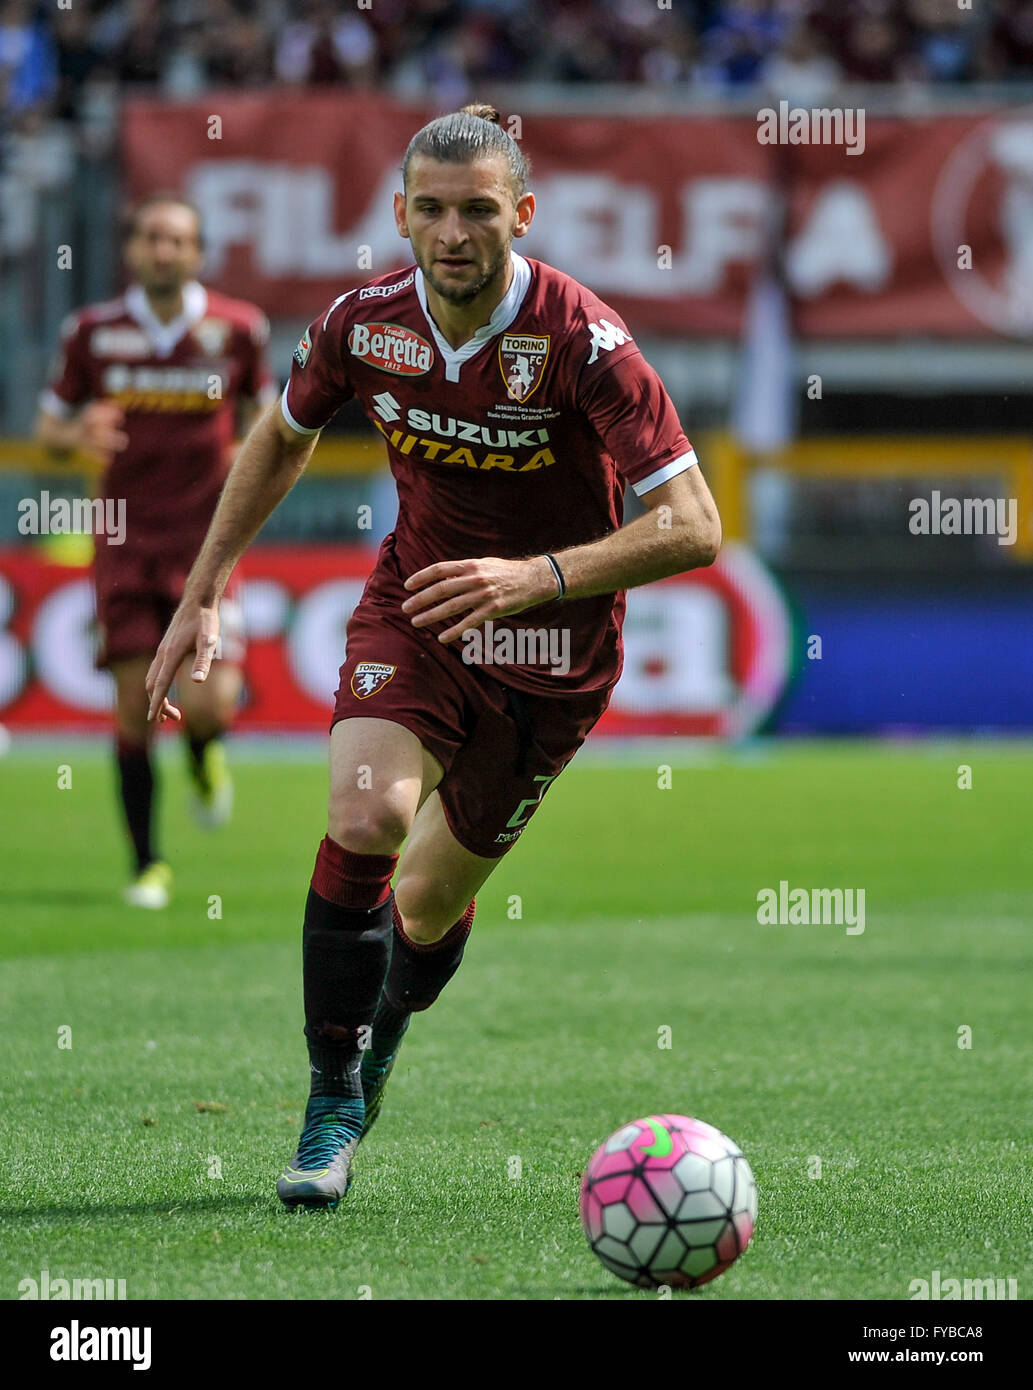 Turin, Italy. 24th Apr, 2016. Gaston Silva in action during the Serie A football match between Torino FC and US Sassuolo. US Sassuolo wins 3-1 over Torino FC. © Nicolò Campo/Pacific Press/Alamy Live News Stock Photo